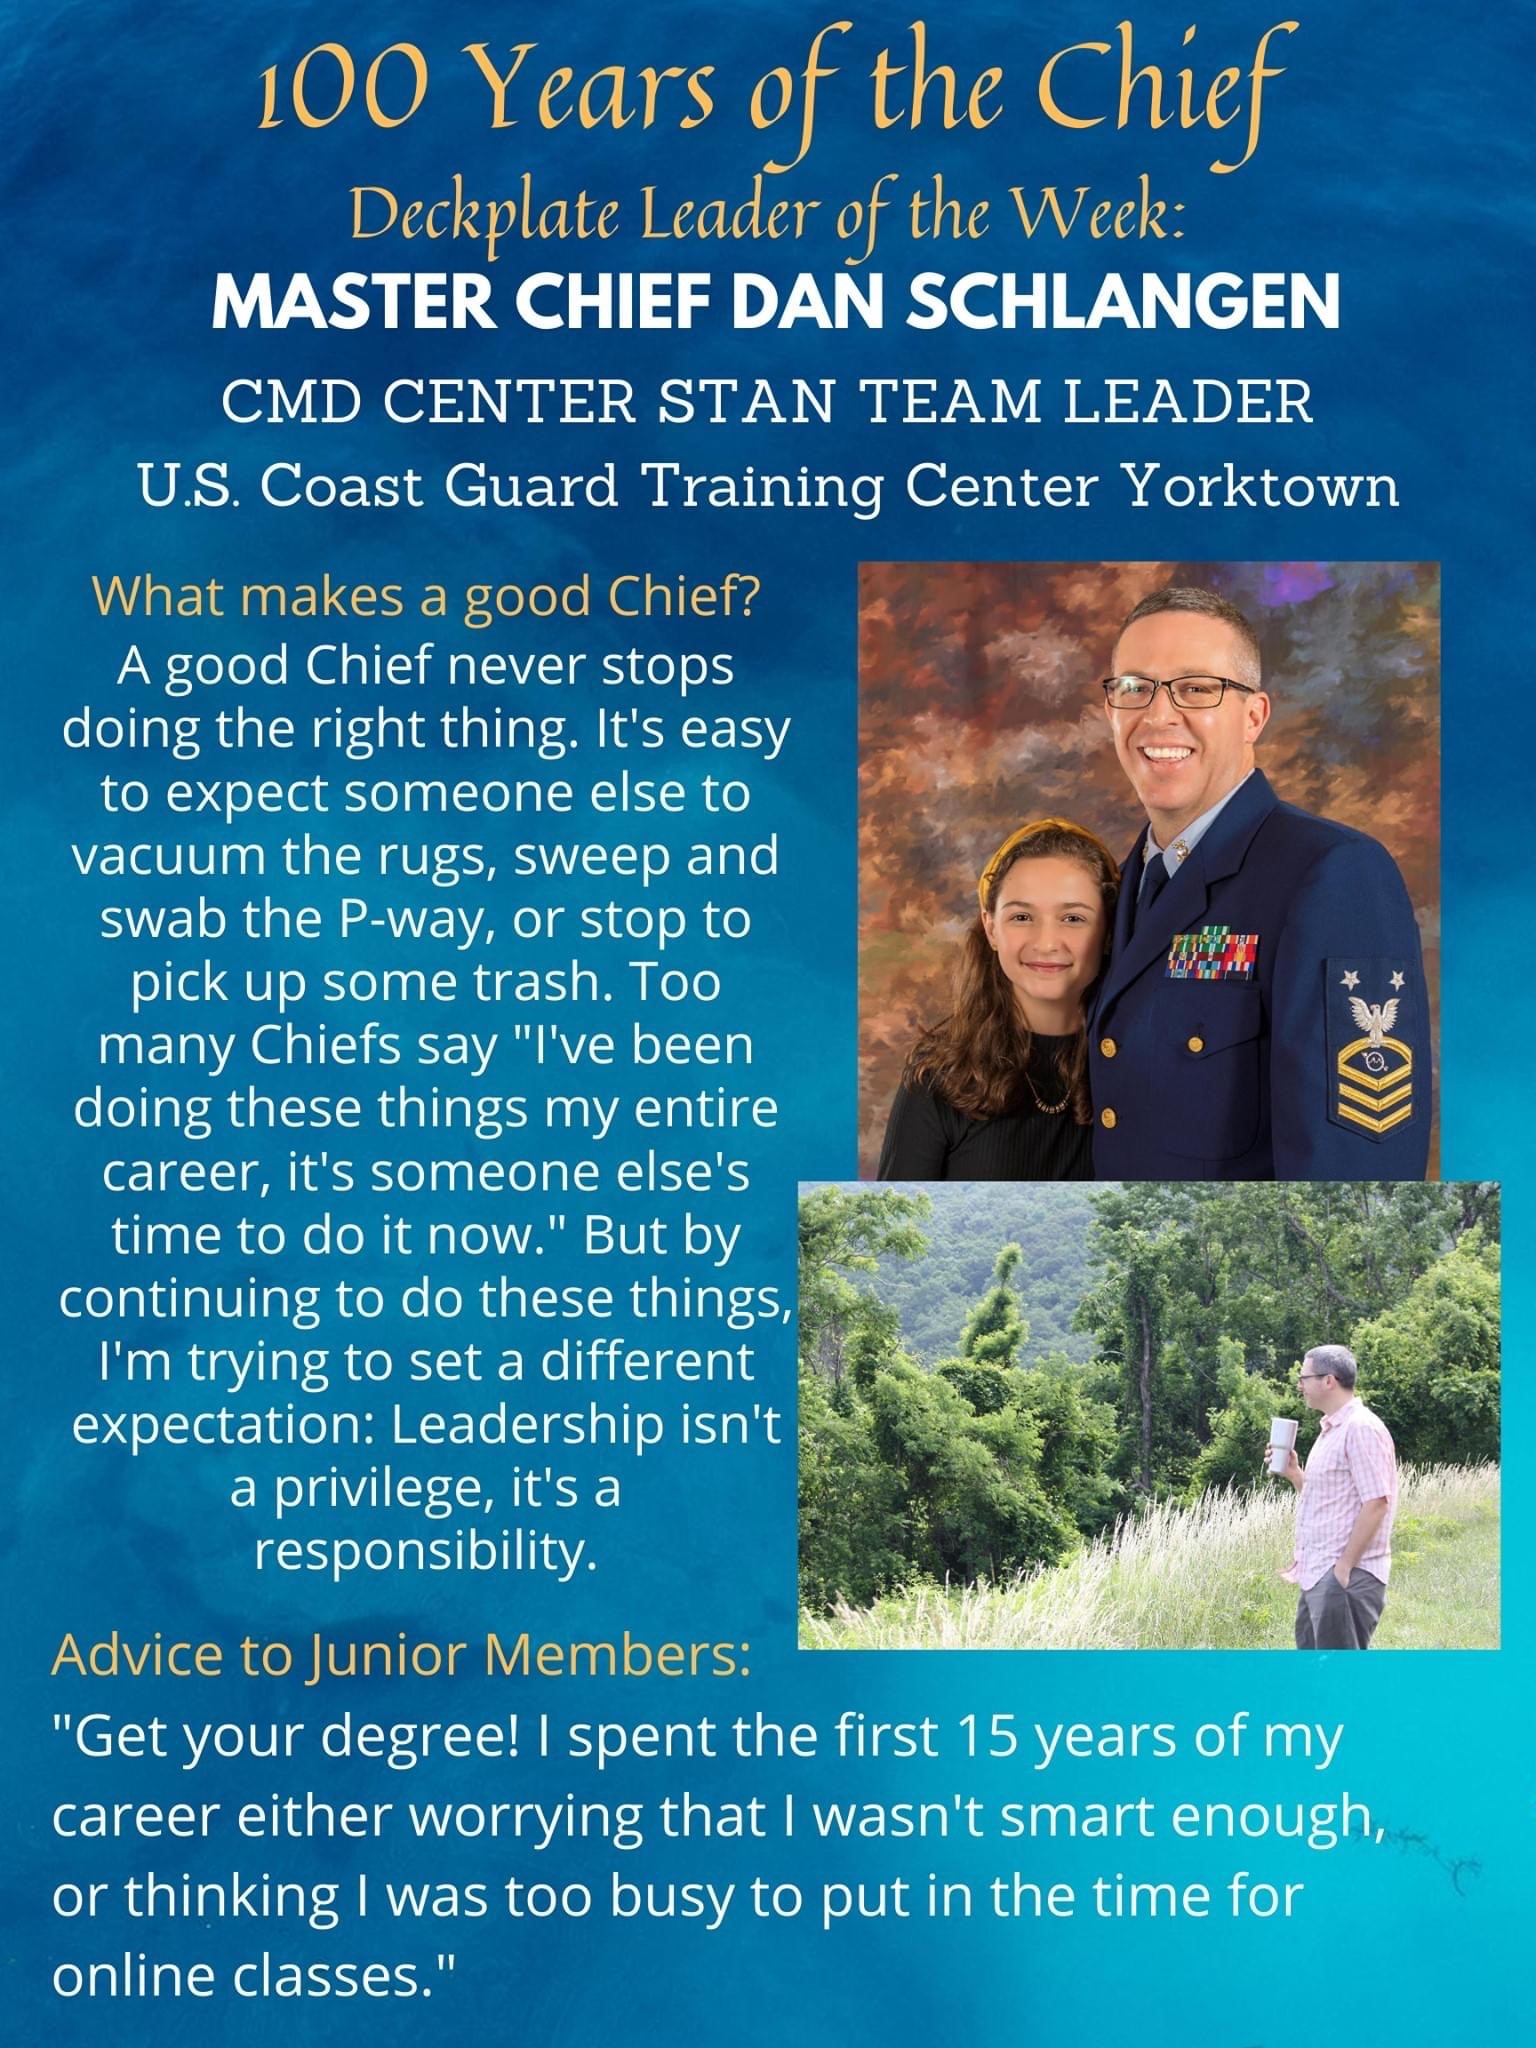 Deck Plate Leader of the Week: Master Chief Dan Schlangen. Command Center STAN Team Leader U.S. Coast Guard Training Center York Town. 100 Years Celebrating the Chief. What makes a good chief? A good Chief never stops doing the right thing. It is easy to expect someone else to vacuum the rugs, sweep and swab the P-way, or stop to pick up some trash. Too many Chiefs say, "I've been doing these things my entire career, it's someone else's time to do it now." But by continuing to do these things, I'm trying to set a different expectation: Leadership isn't a privilege, it's a responsibility.